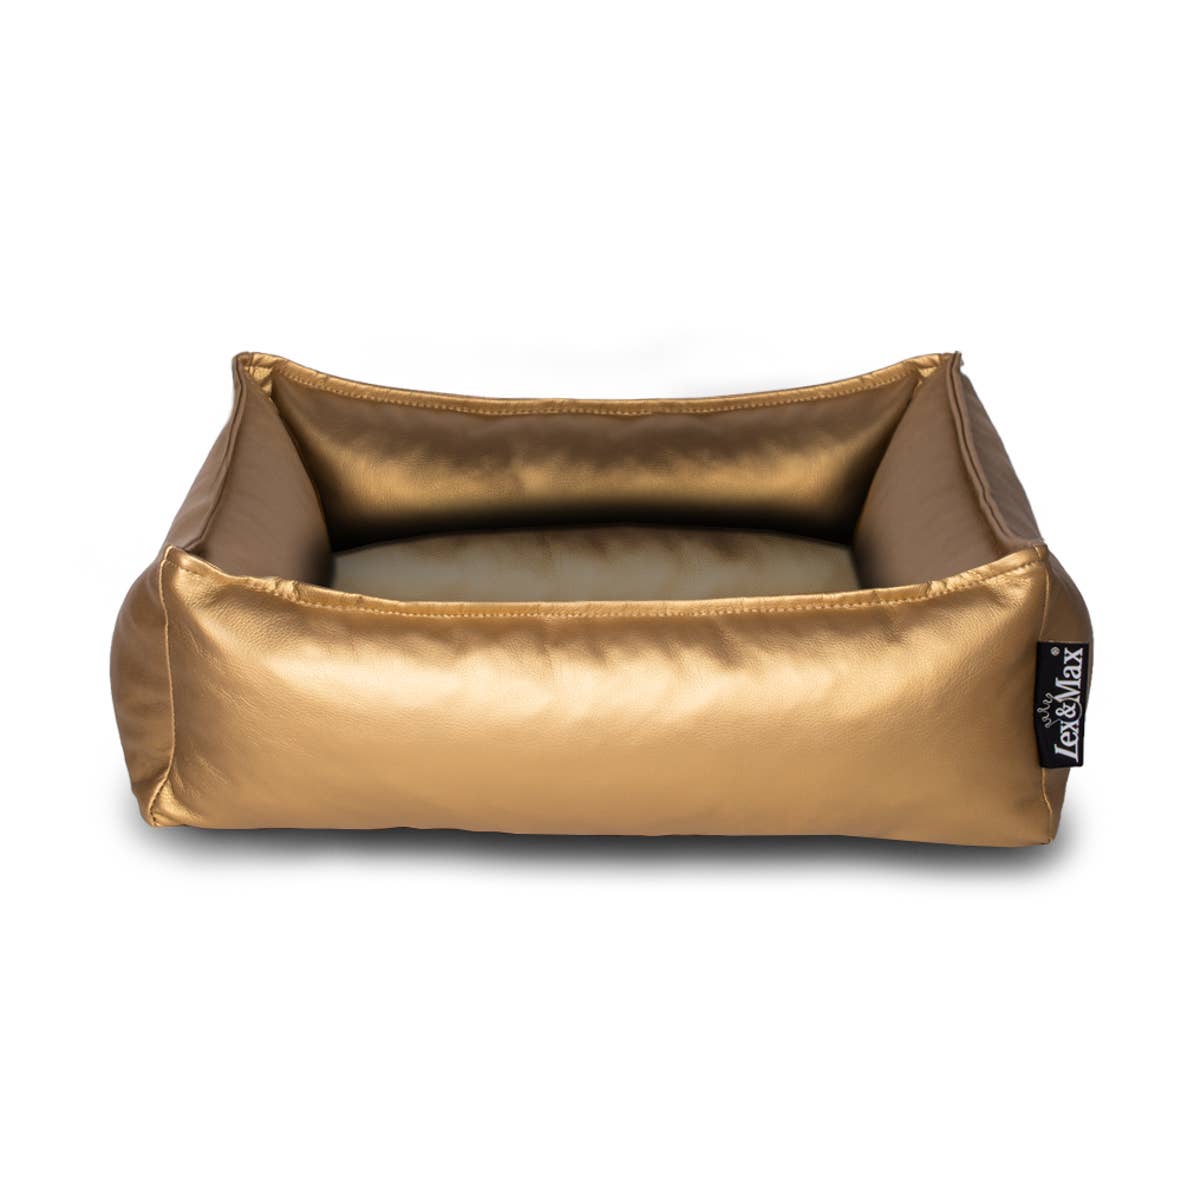 Gold Lounger Dog Bed Small Image